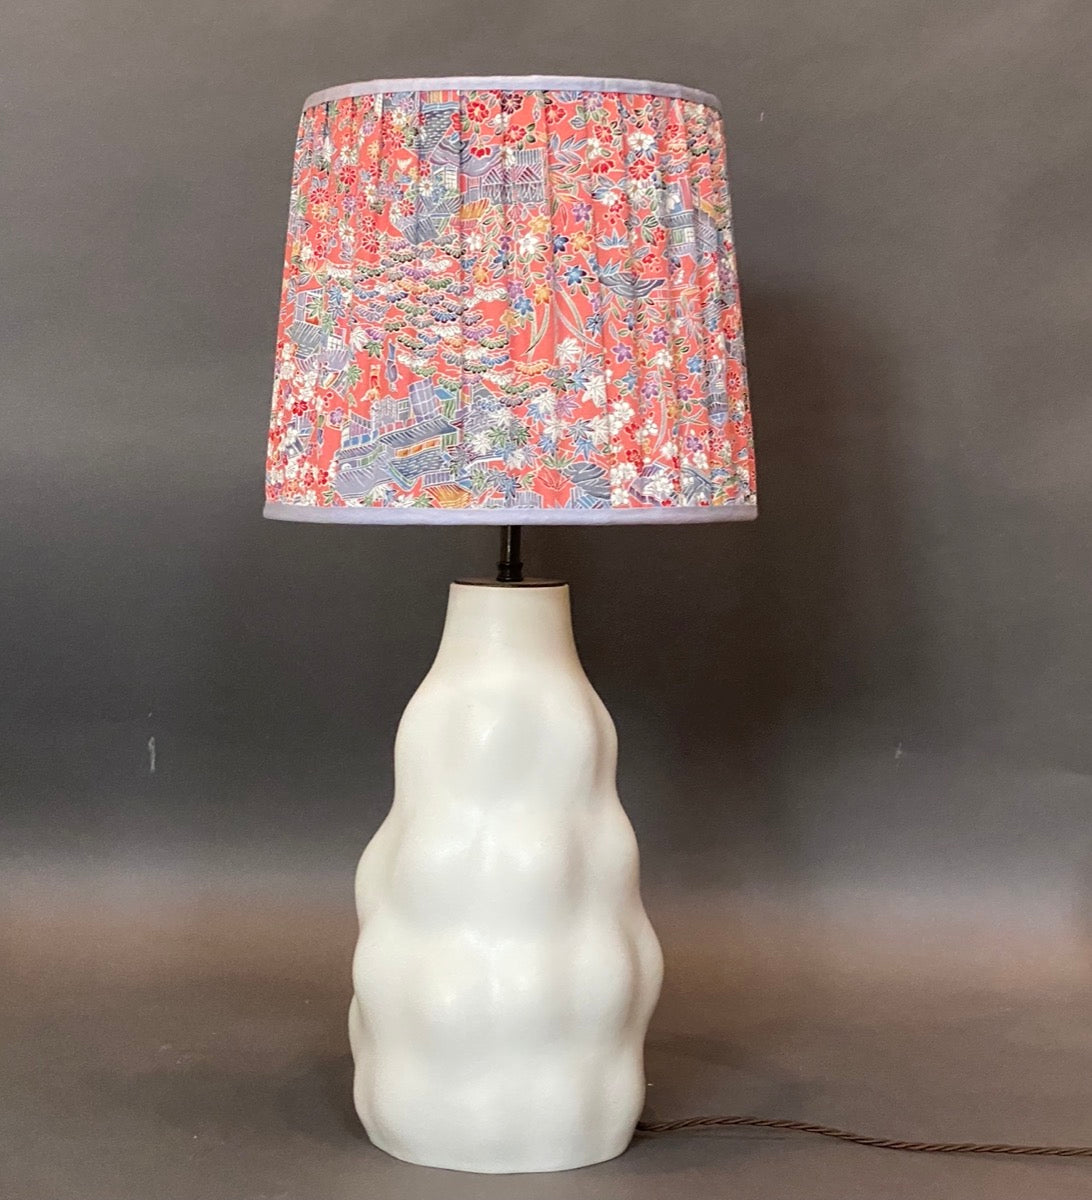 Raspberry and blue patterned silk kimono Lampshade shown on a ceramic 'Iki' lamp base on a grey background